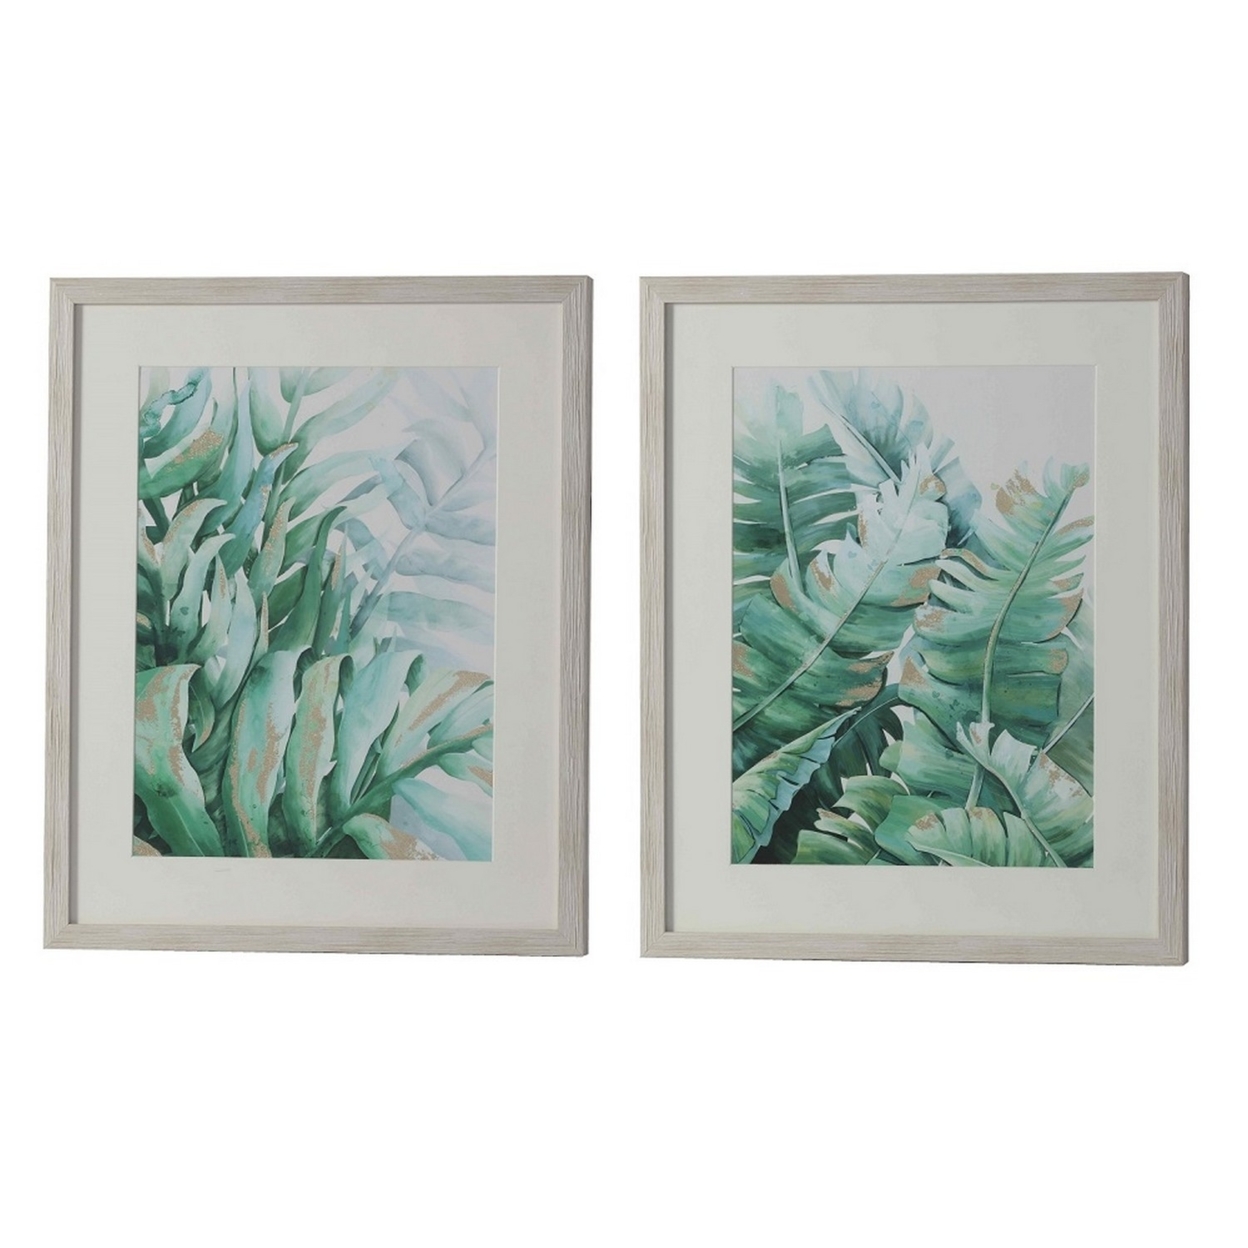 Wall Art With Painted Tropical Leaves, Set Of 2, Gray And Green- Saltoro Sherpi